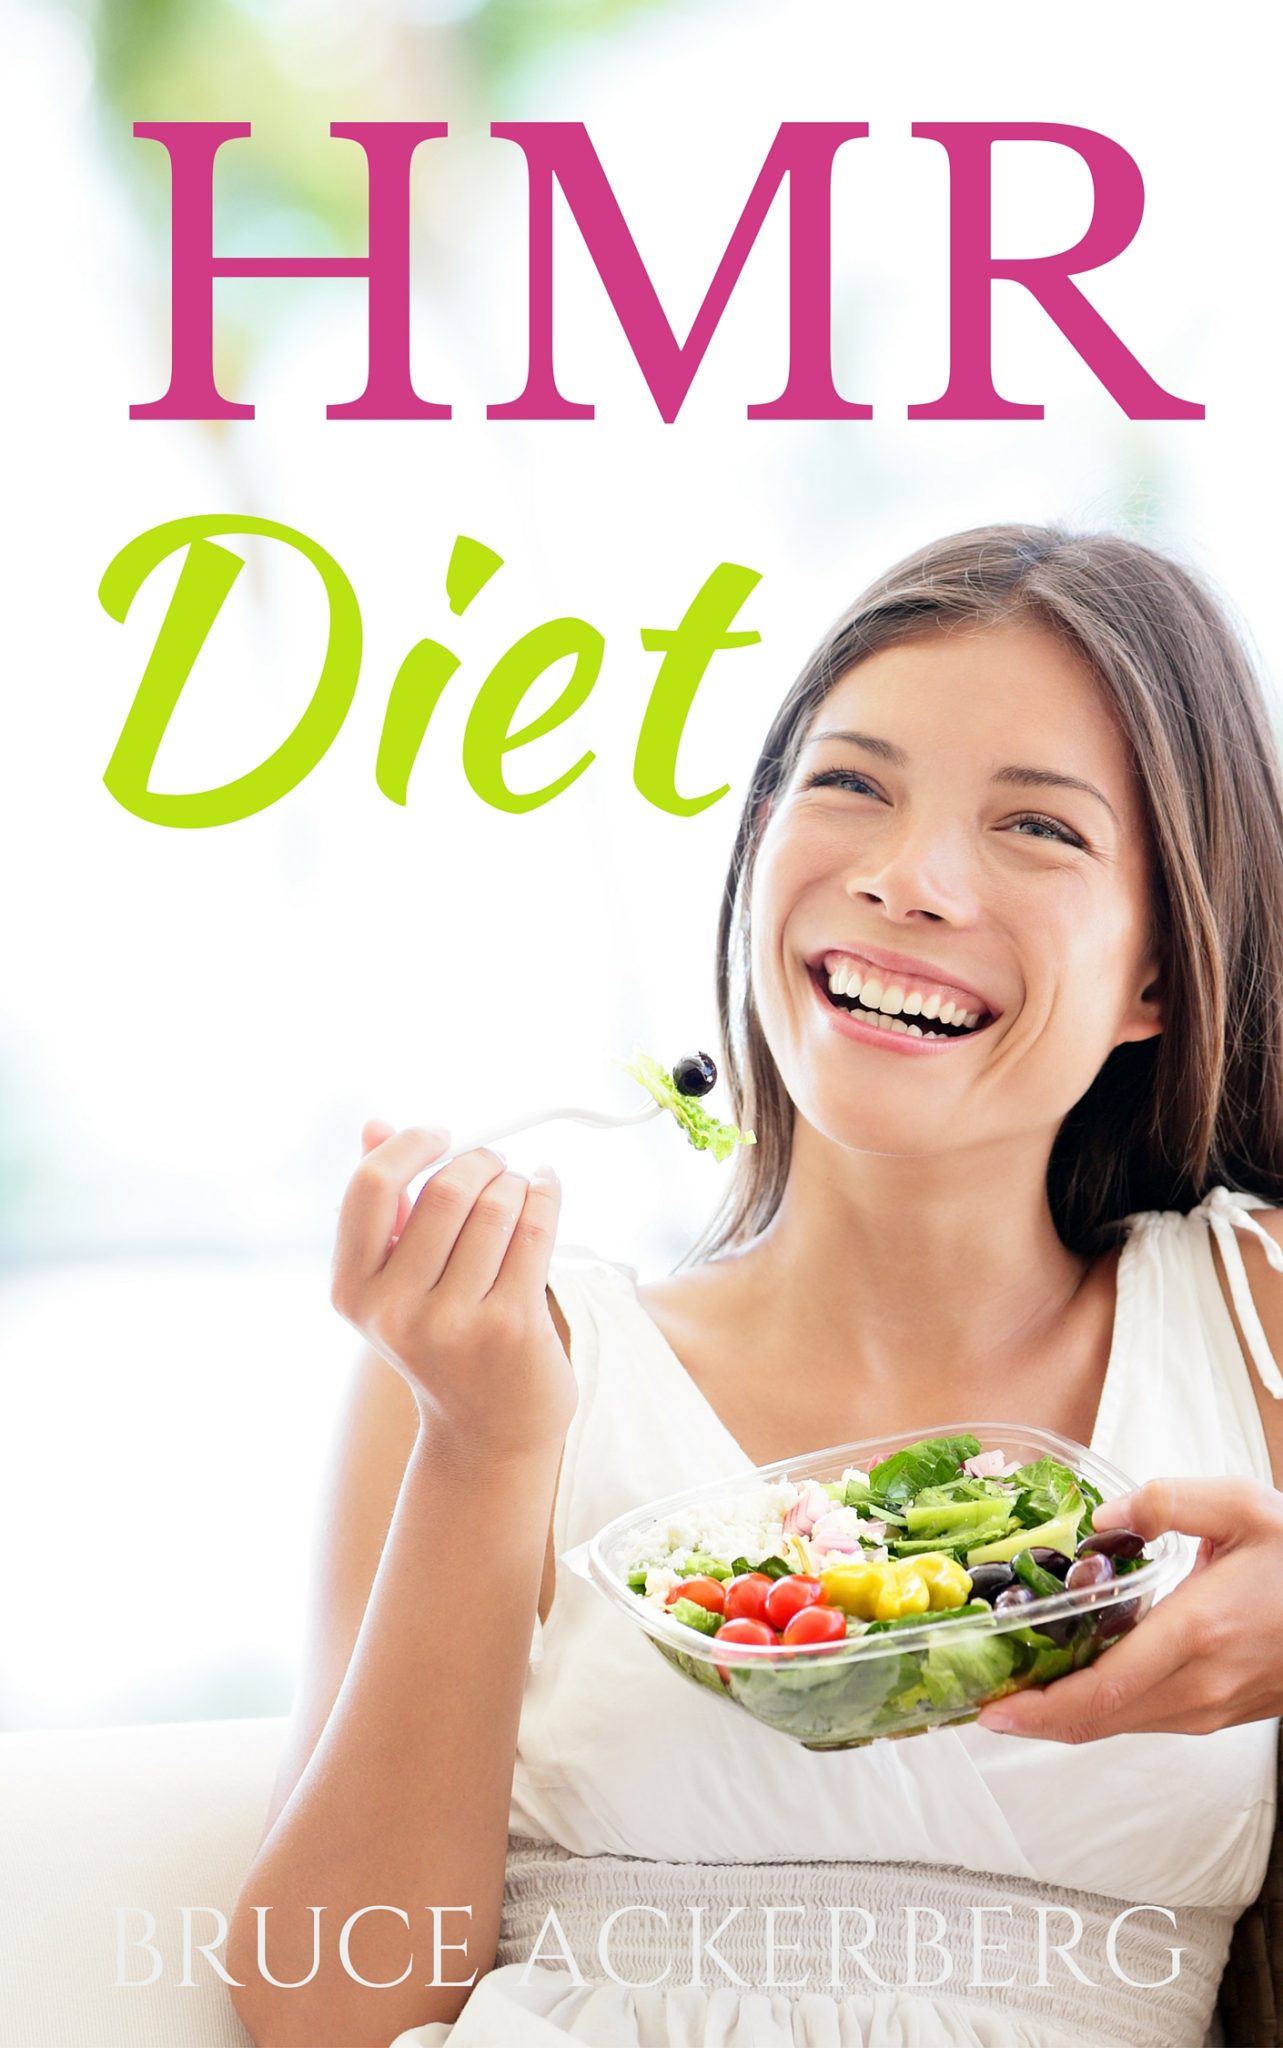 FREE: HMR Diet: Everything You Need to Know about the HMR Diet by Bruce Ackerberg